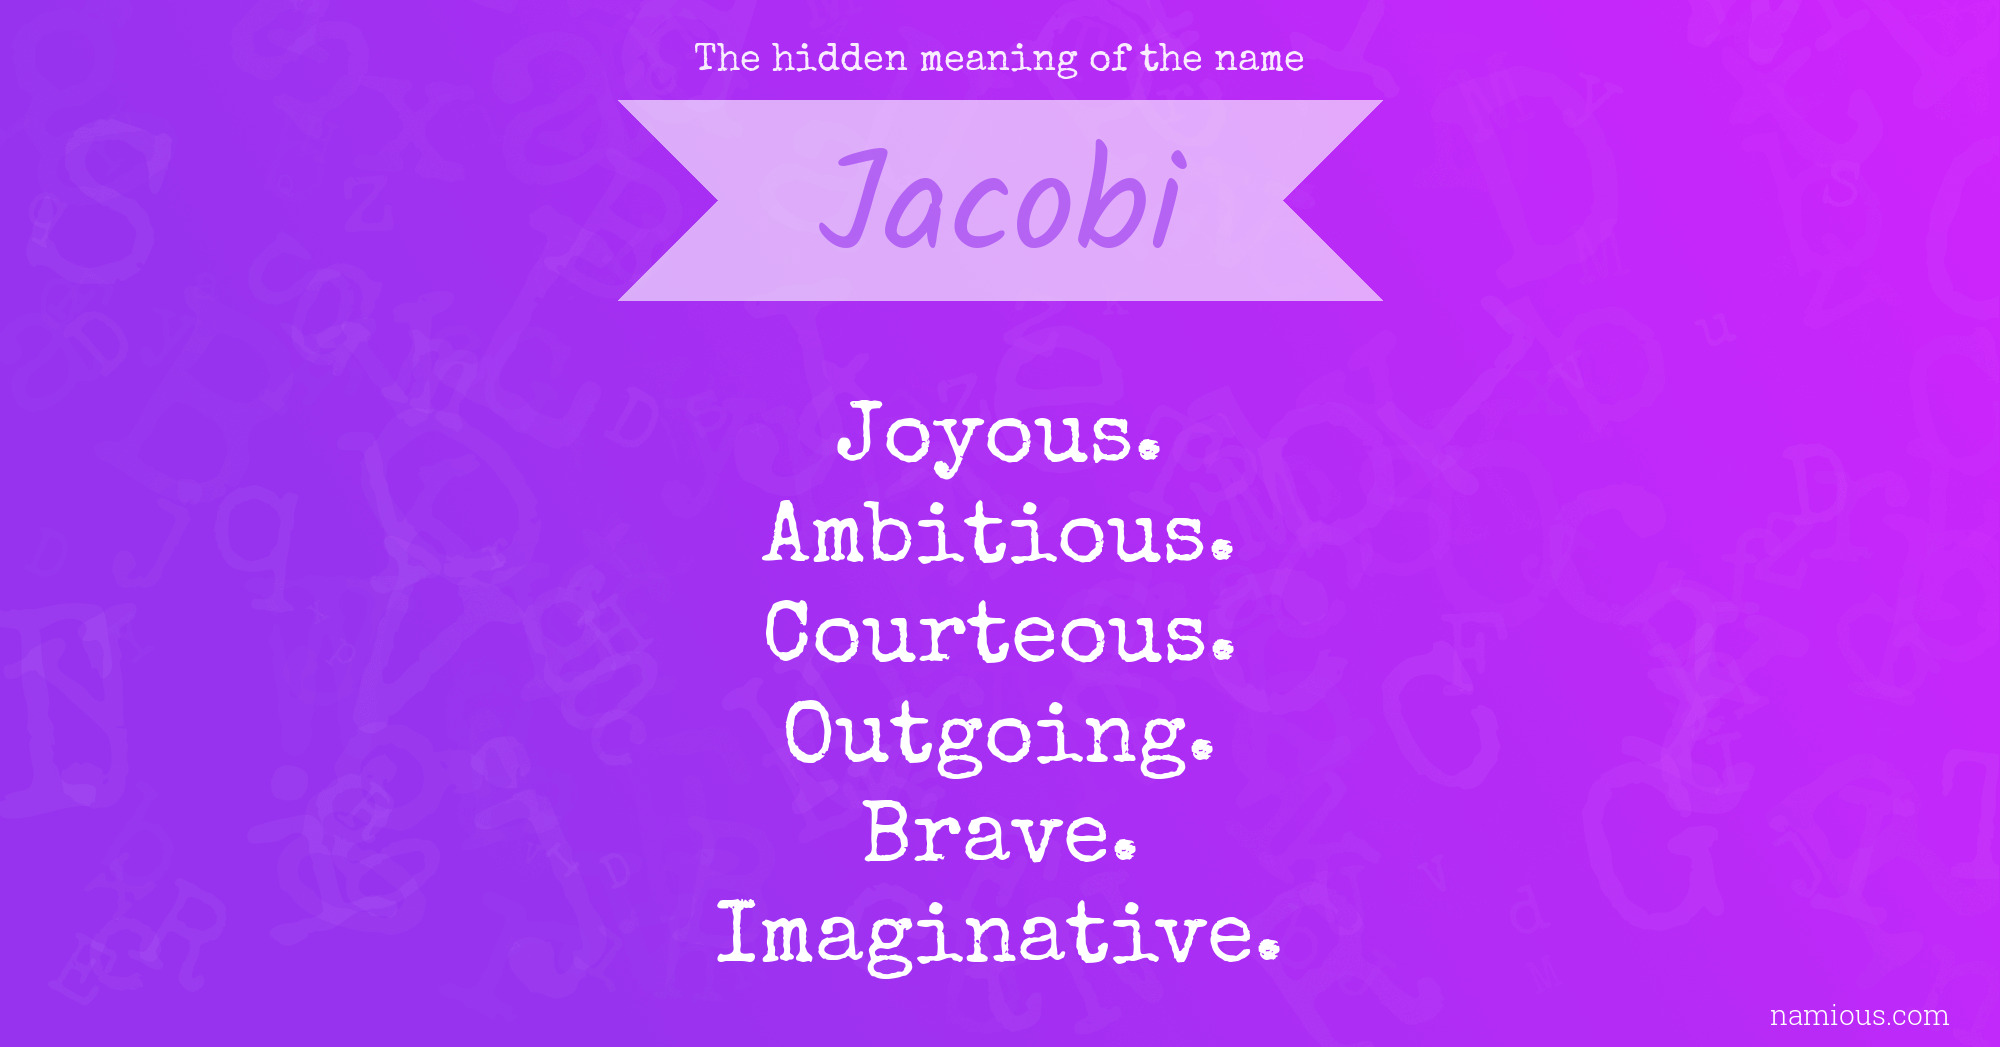 The hidden meaning of the name Jacobi